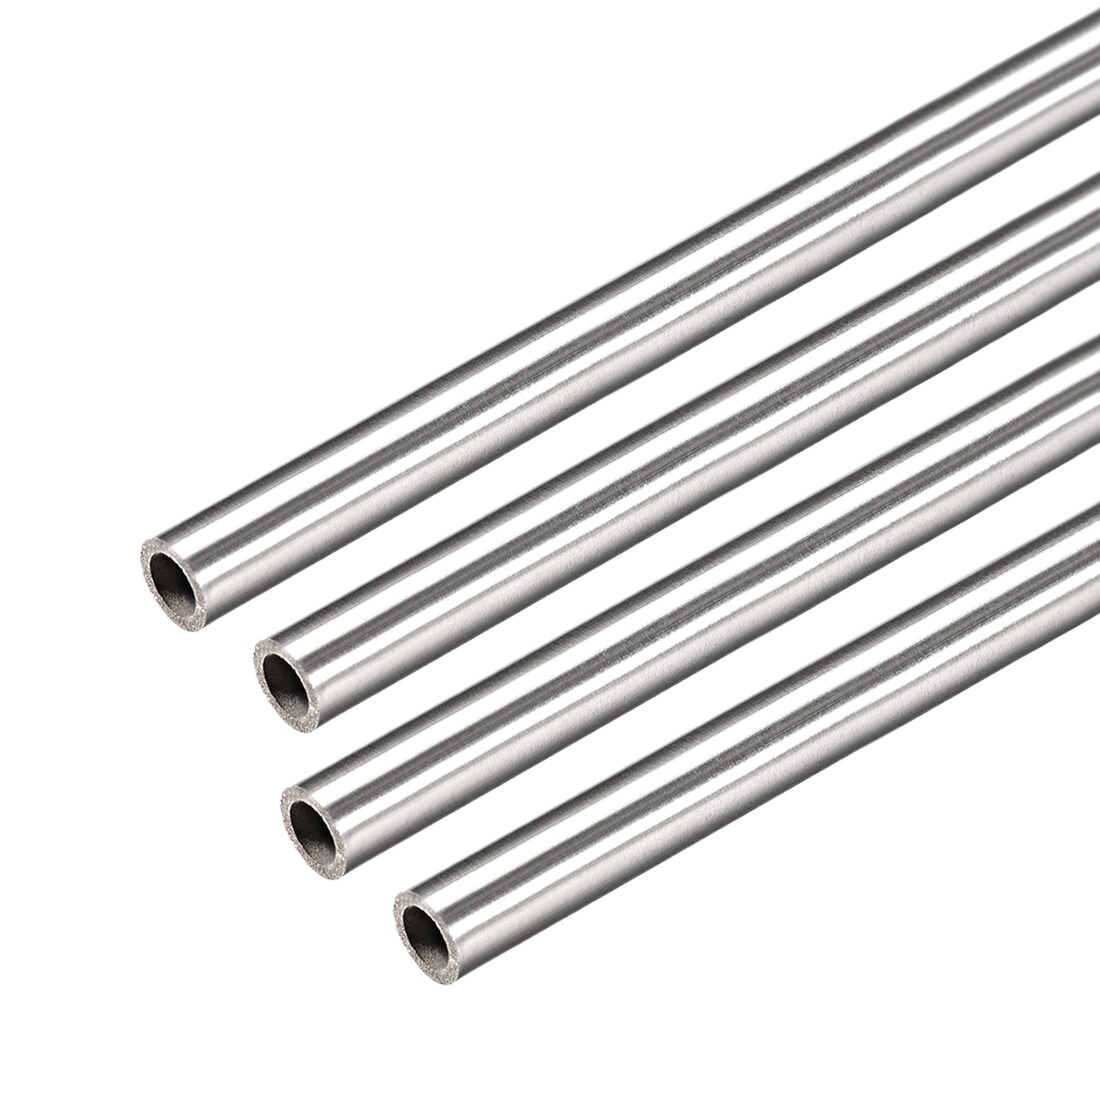 SS304 Stainless Steel  Straight Tubing Pipe 3mm OD X 0.1 Wall-length by order 